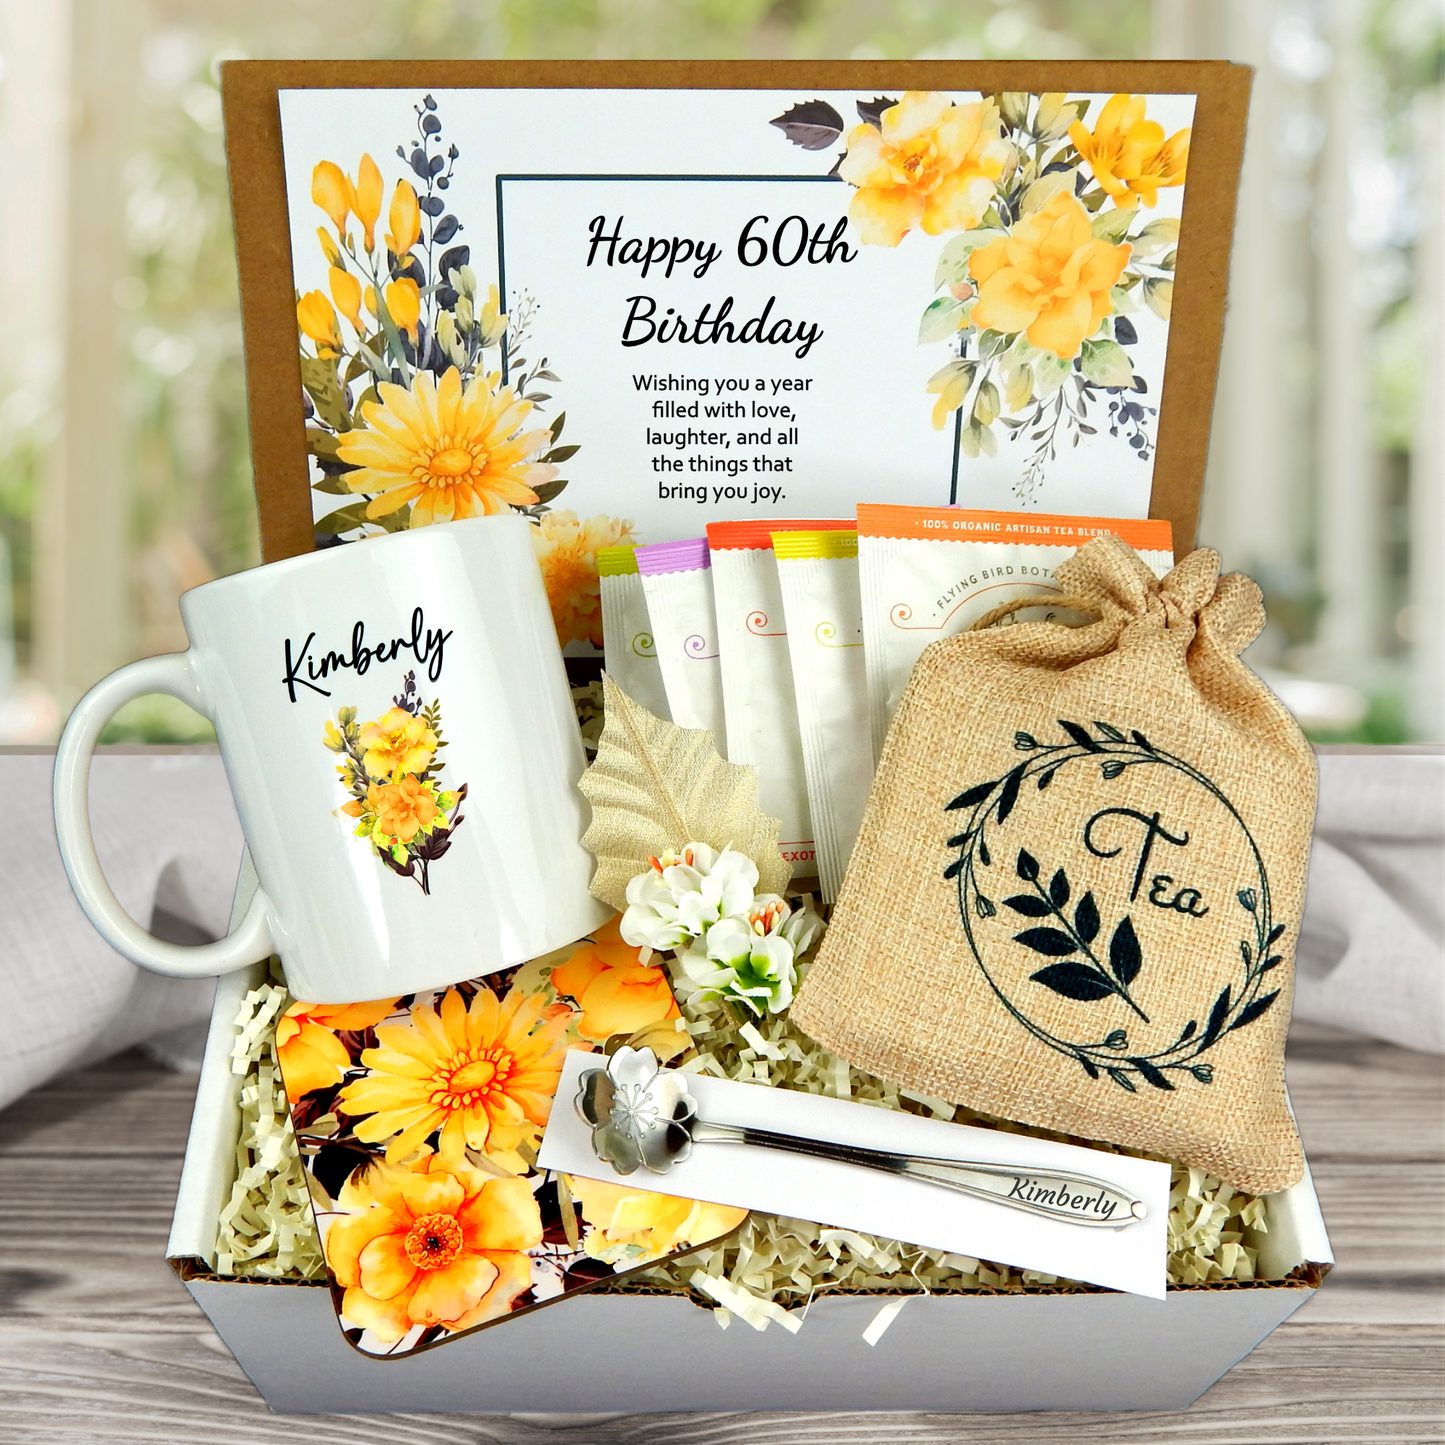 Yellow and bright gift for her 60th birthday with personalized mug, meaningful card and assorted teas with engraving